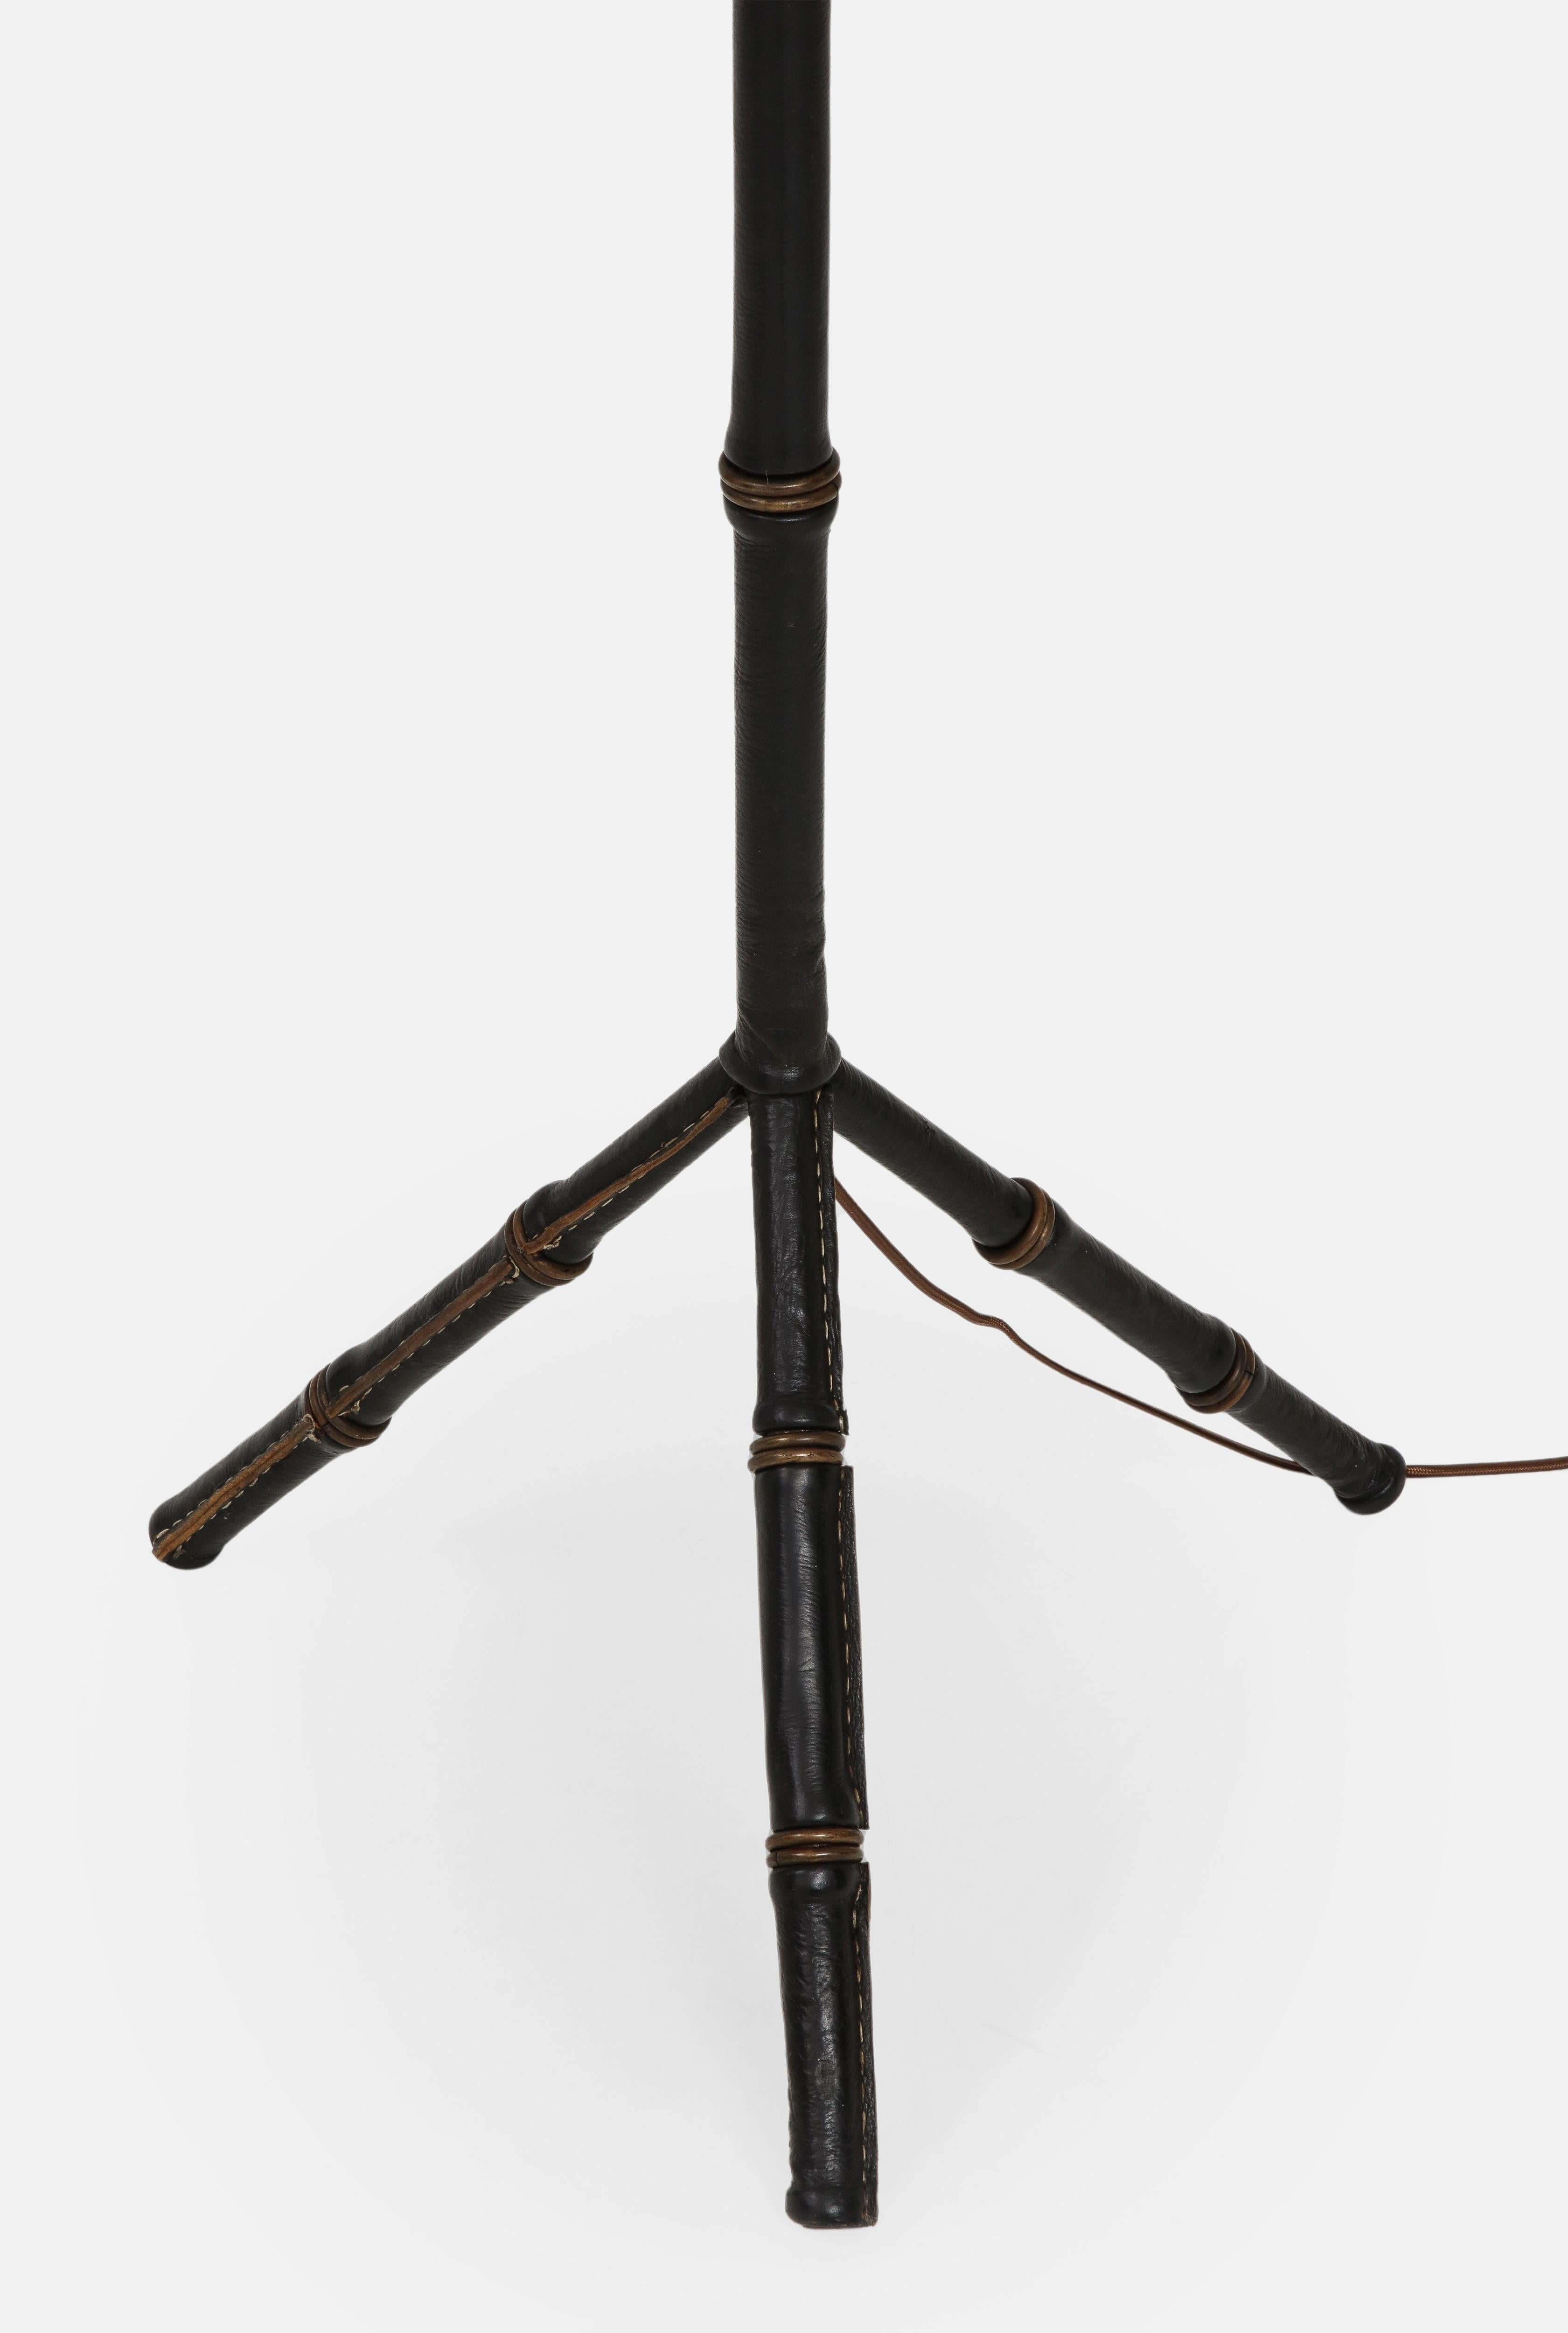 Jacques Adnet Black Leather Tripod Faux Bamboo Floor Lamp, 1950s For Sale 2